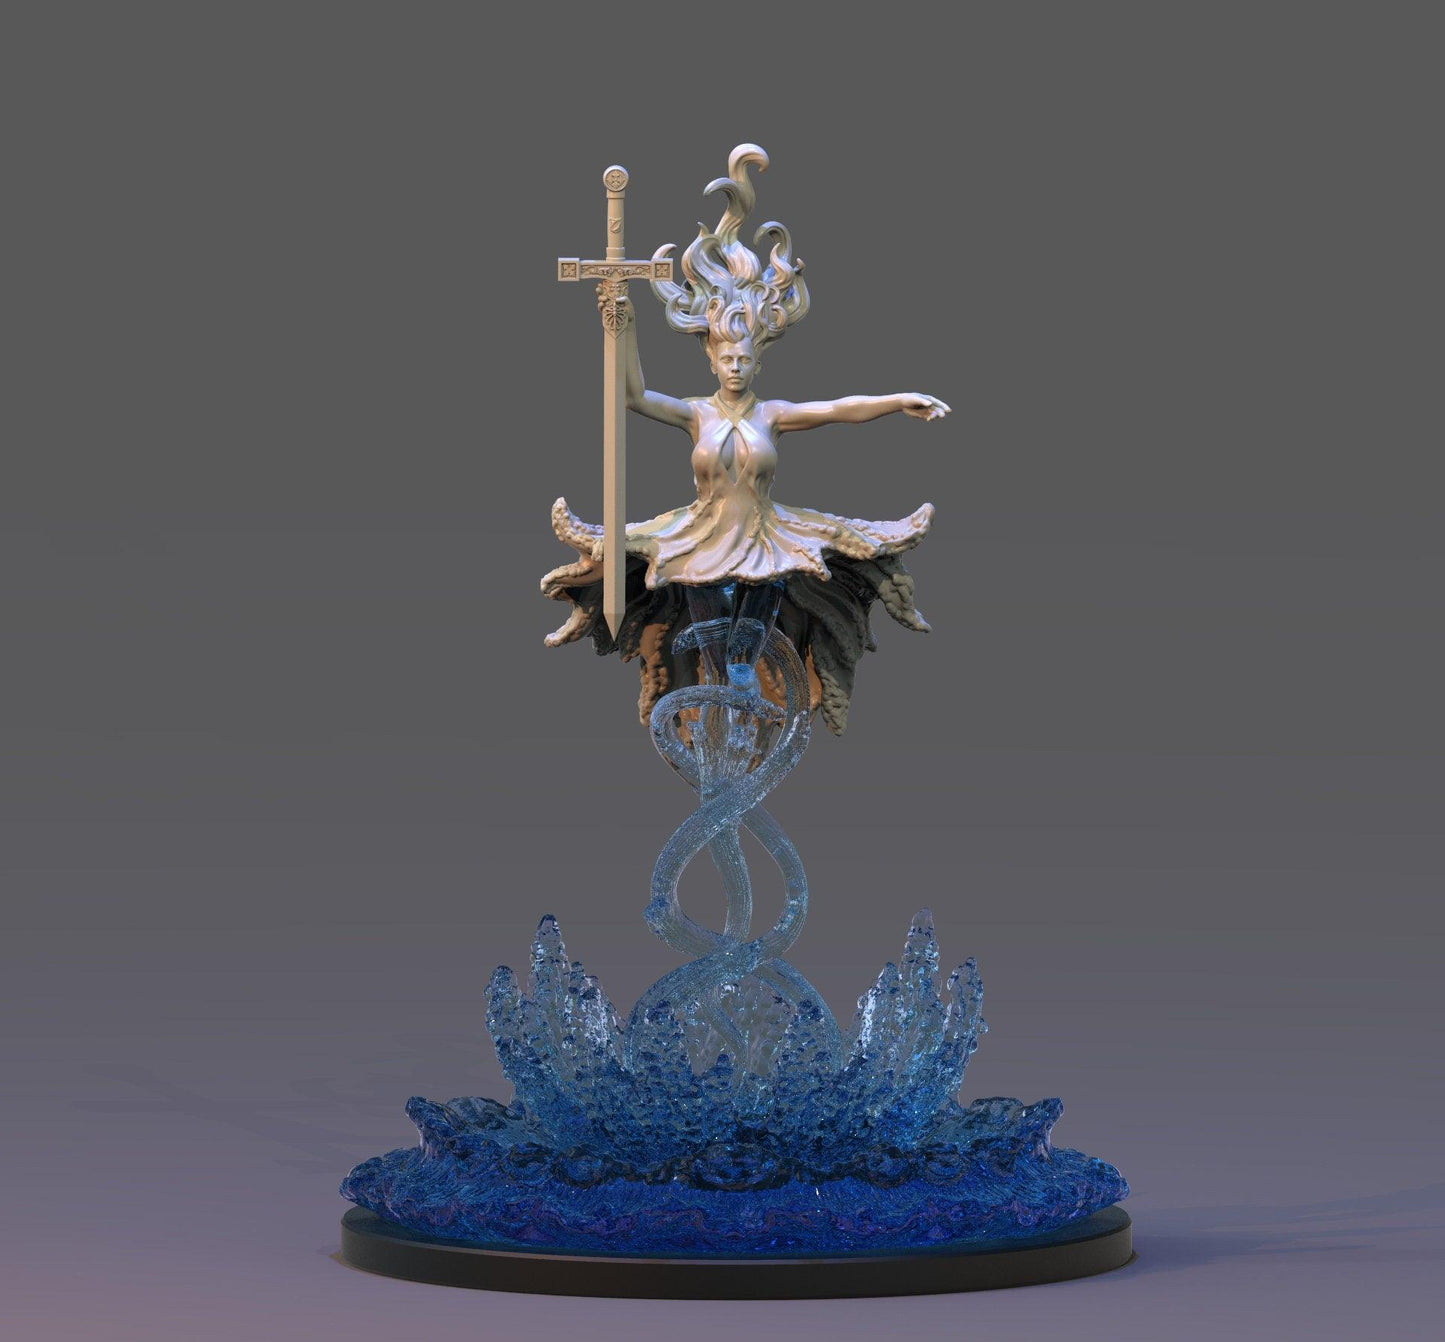 Nimueh Miniature, Lady of the Lake | Clay Cyanide | Legend of King Arthur | DnD Miniature | Dungeons and Dragons,, DnD 5e - Plague Miniatures shop for DnD Miniatures